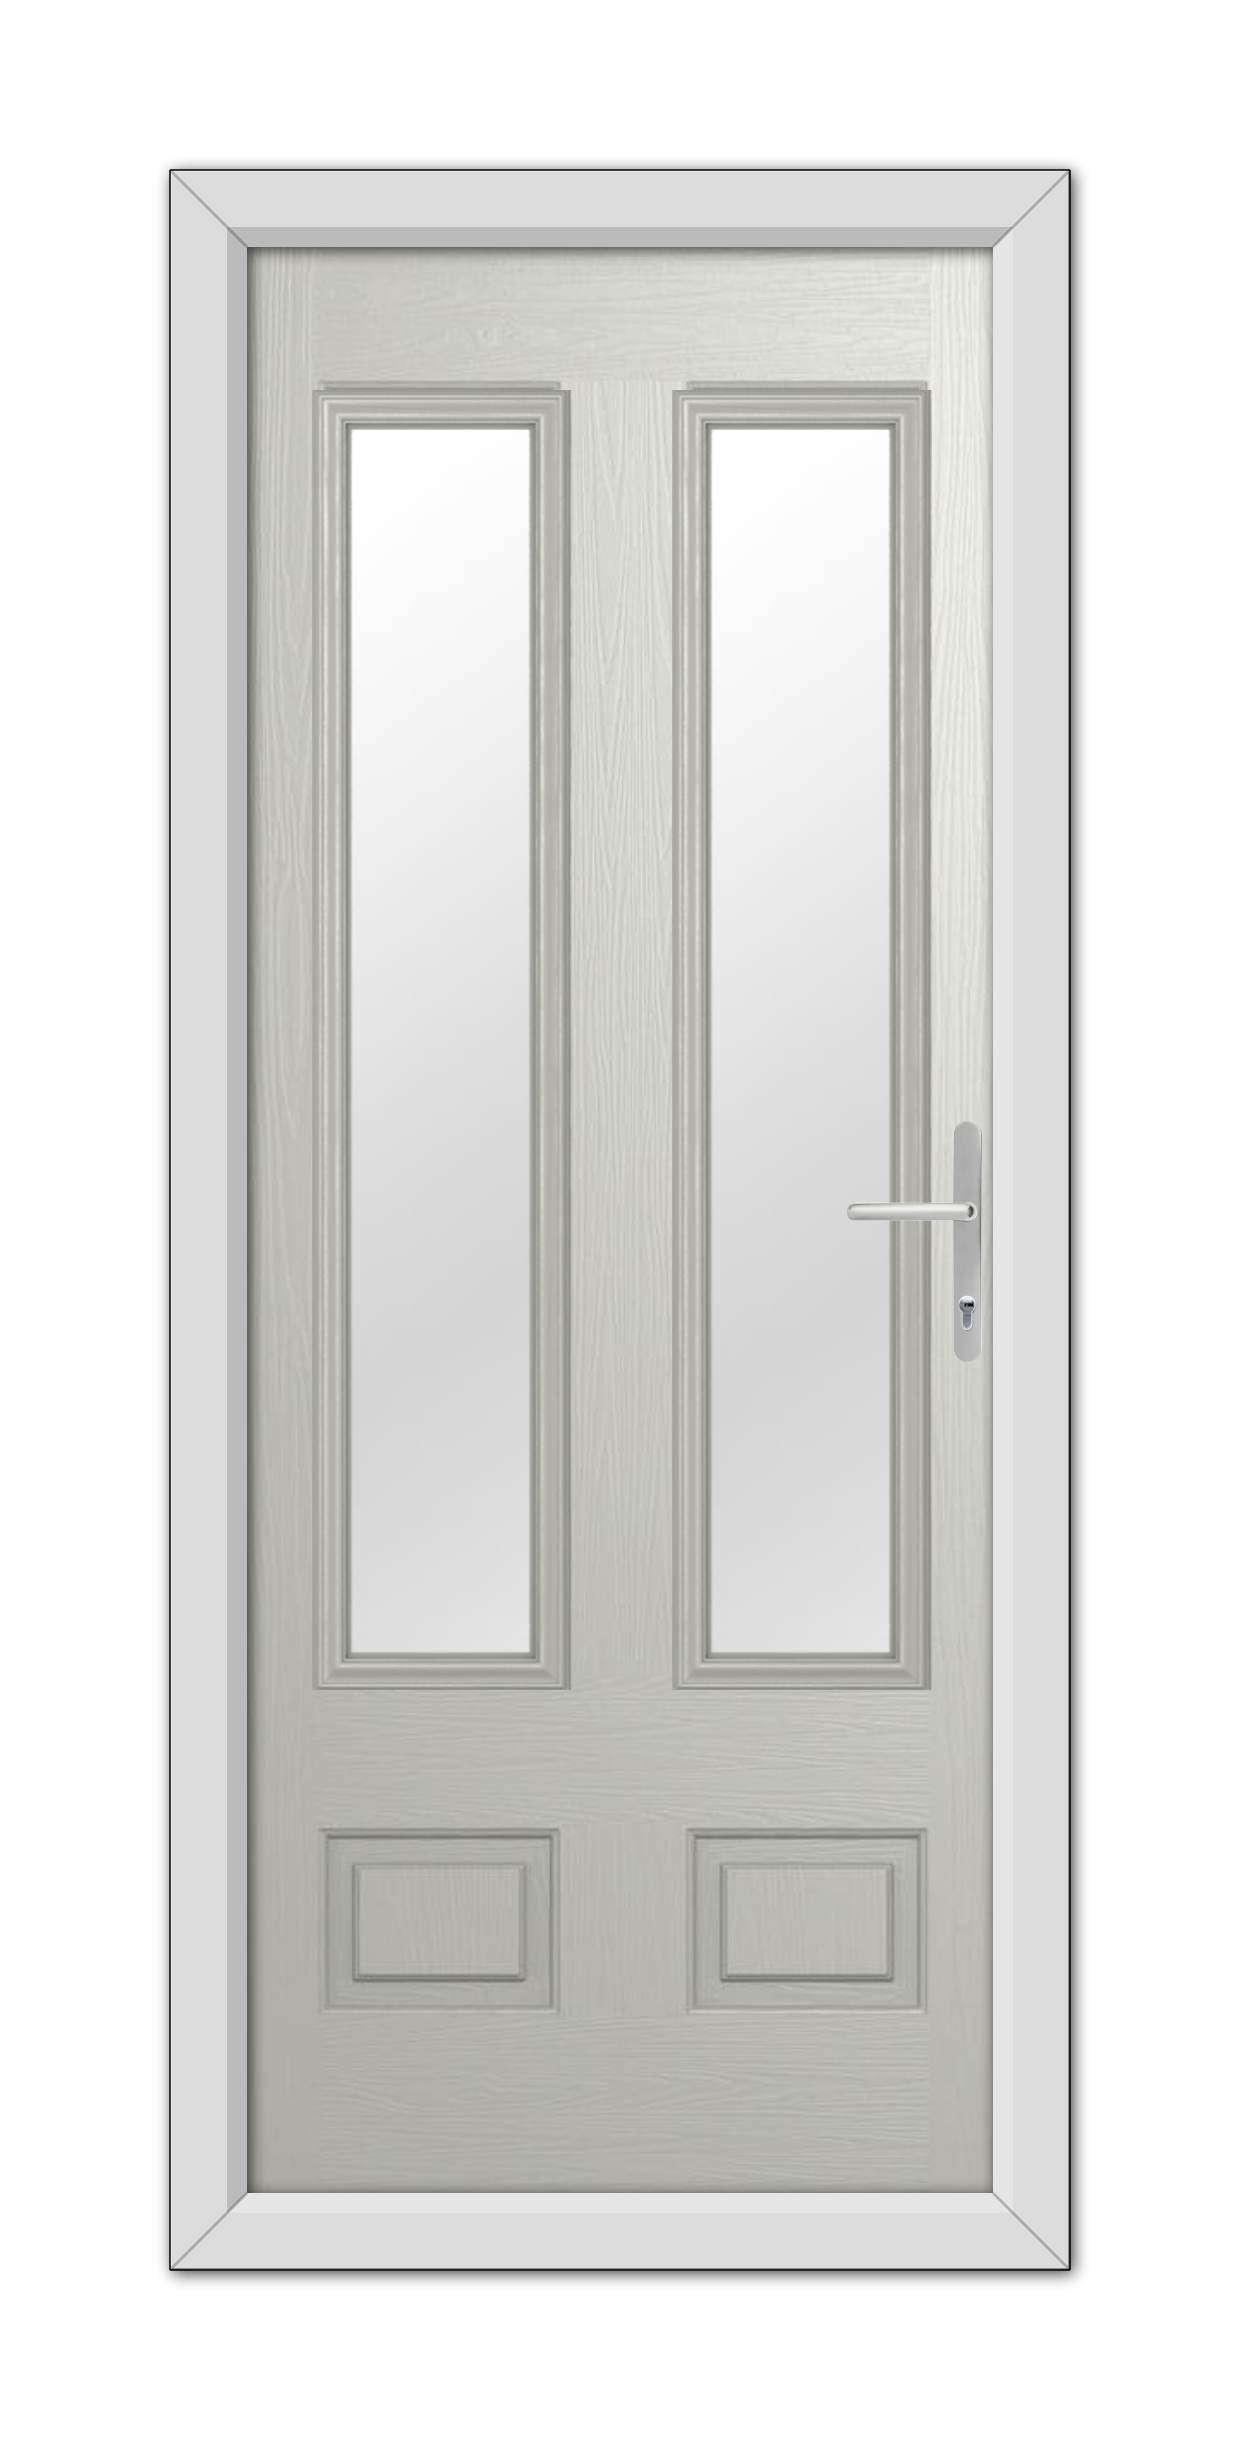 A modern Agate Grey Aston Glazed 2 Composite Door 48mm Timber Core with glass panels, metal handle, and a white frame, viewed head-on.